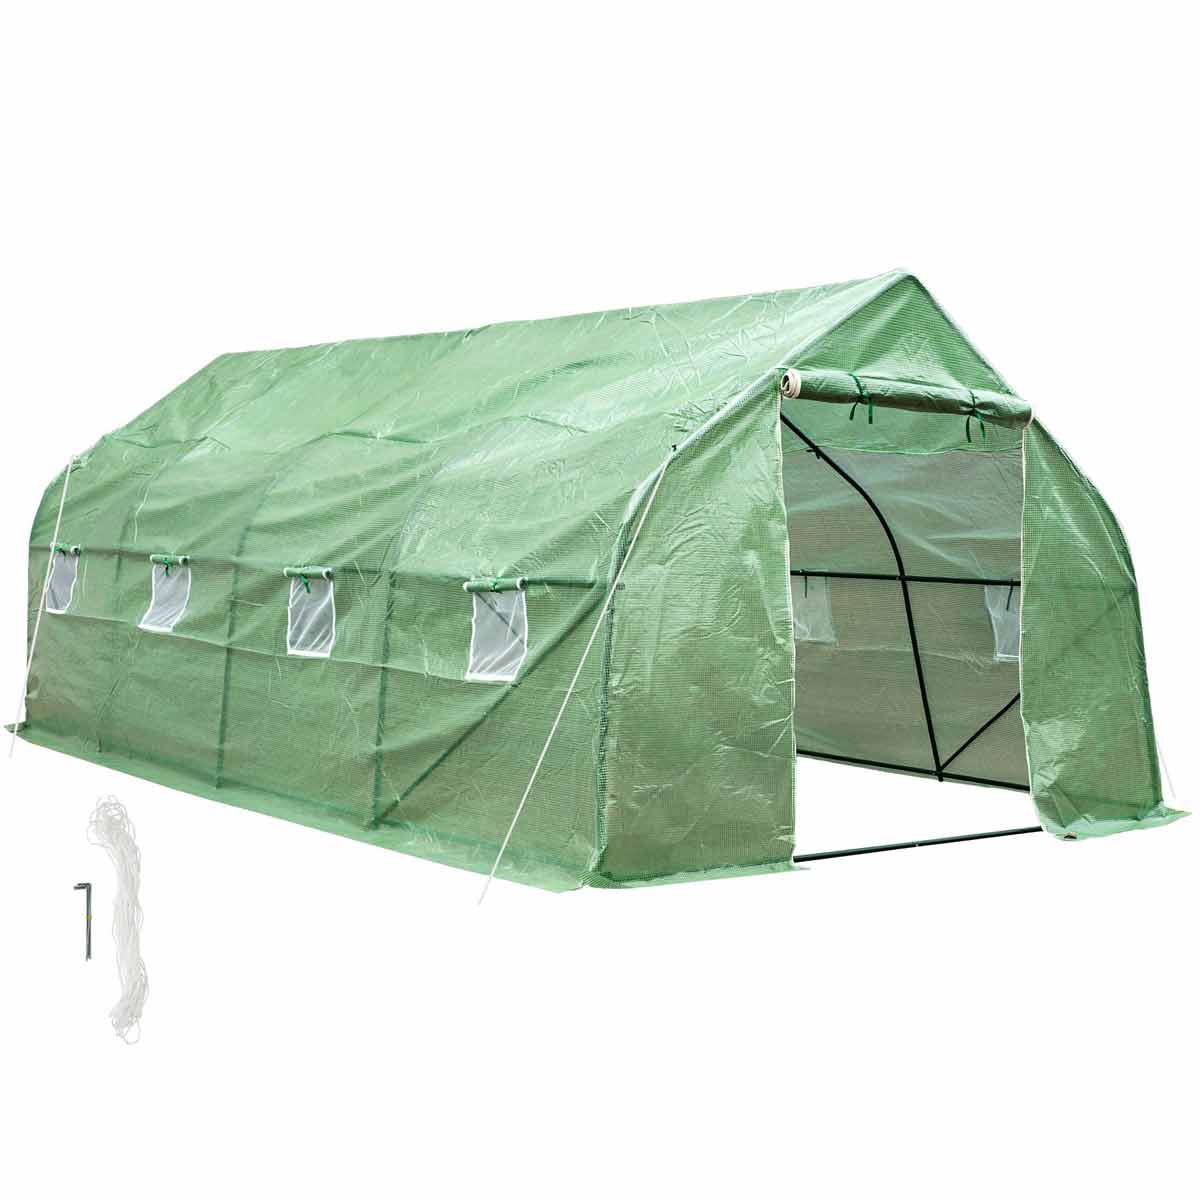 Tectake Polytunnel Greenhouse Tent With 8 Windows 600X300X205cm Green